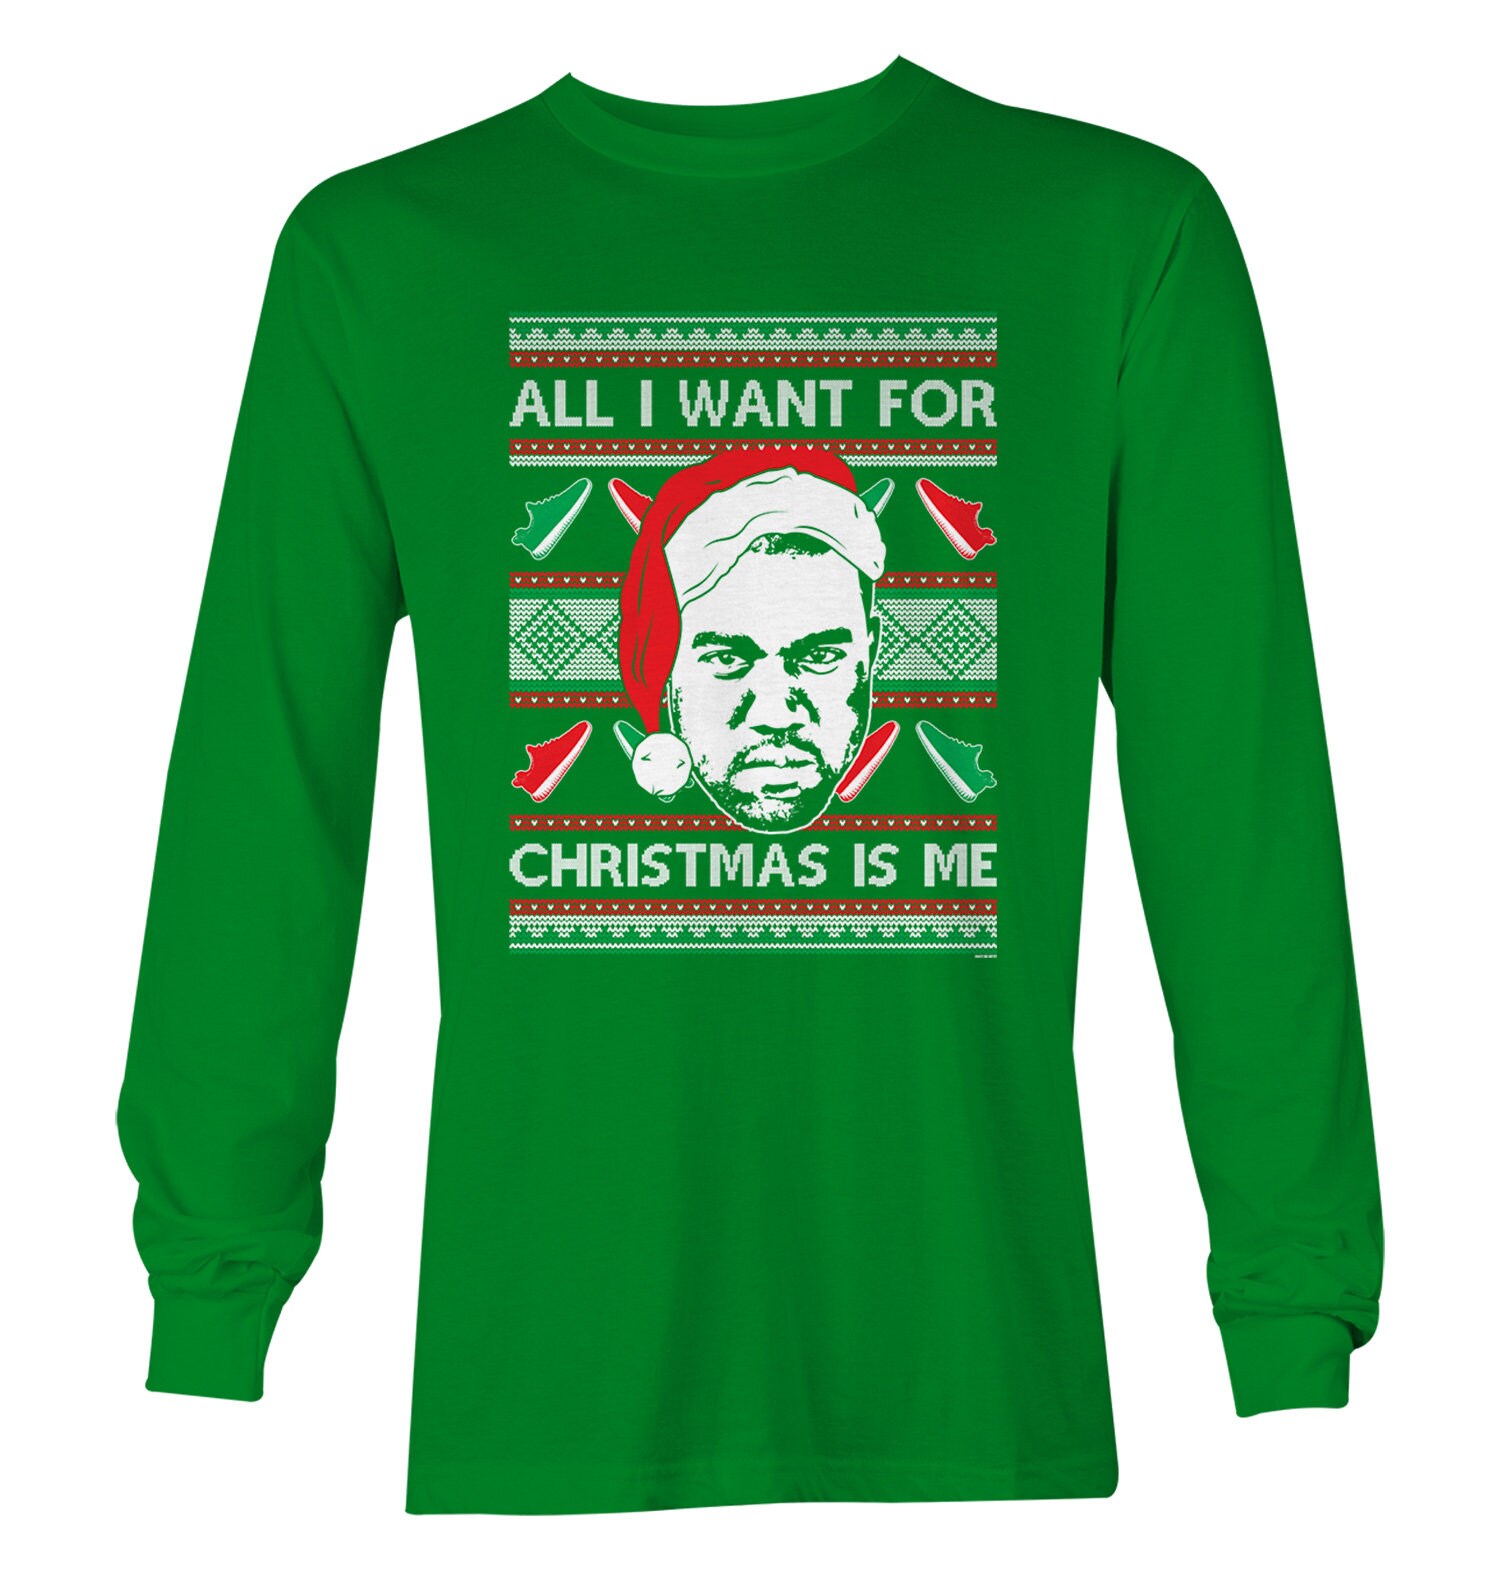 All I Want for Christmas is Me Unisex Long Sleeve Shirt Rap - Etsy